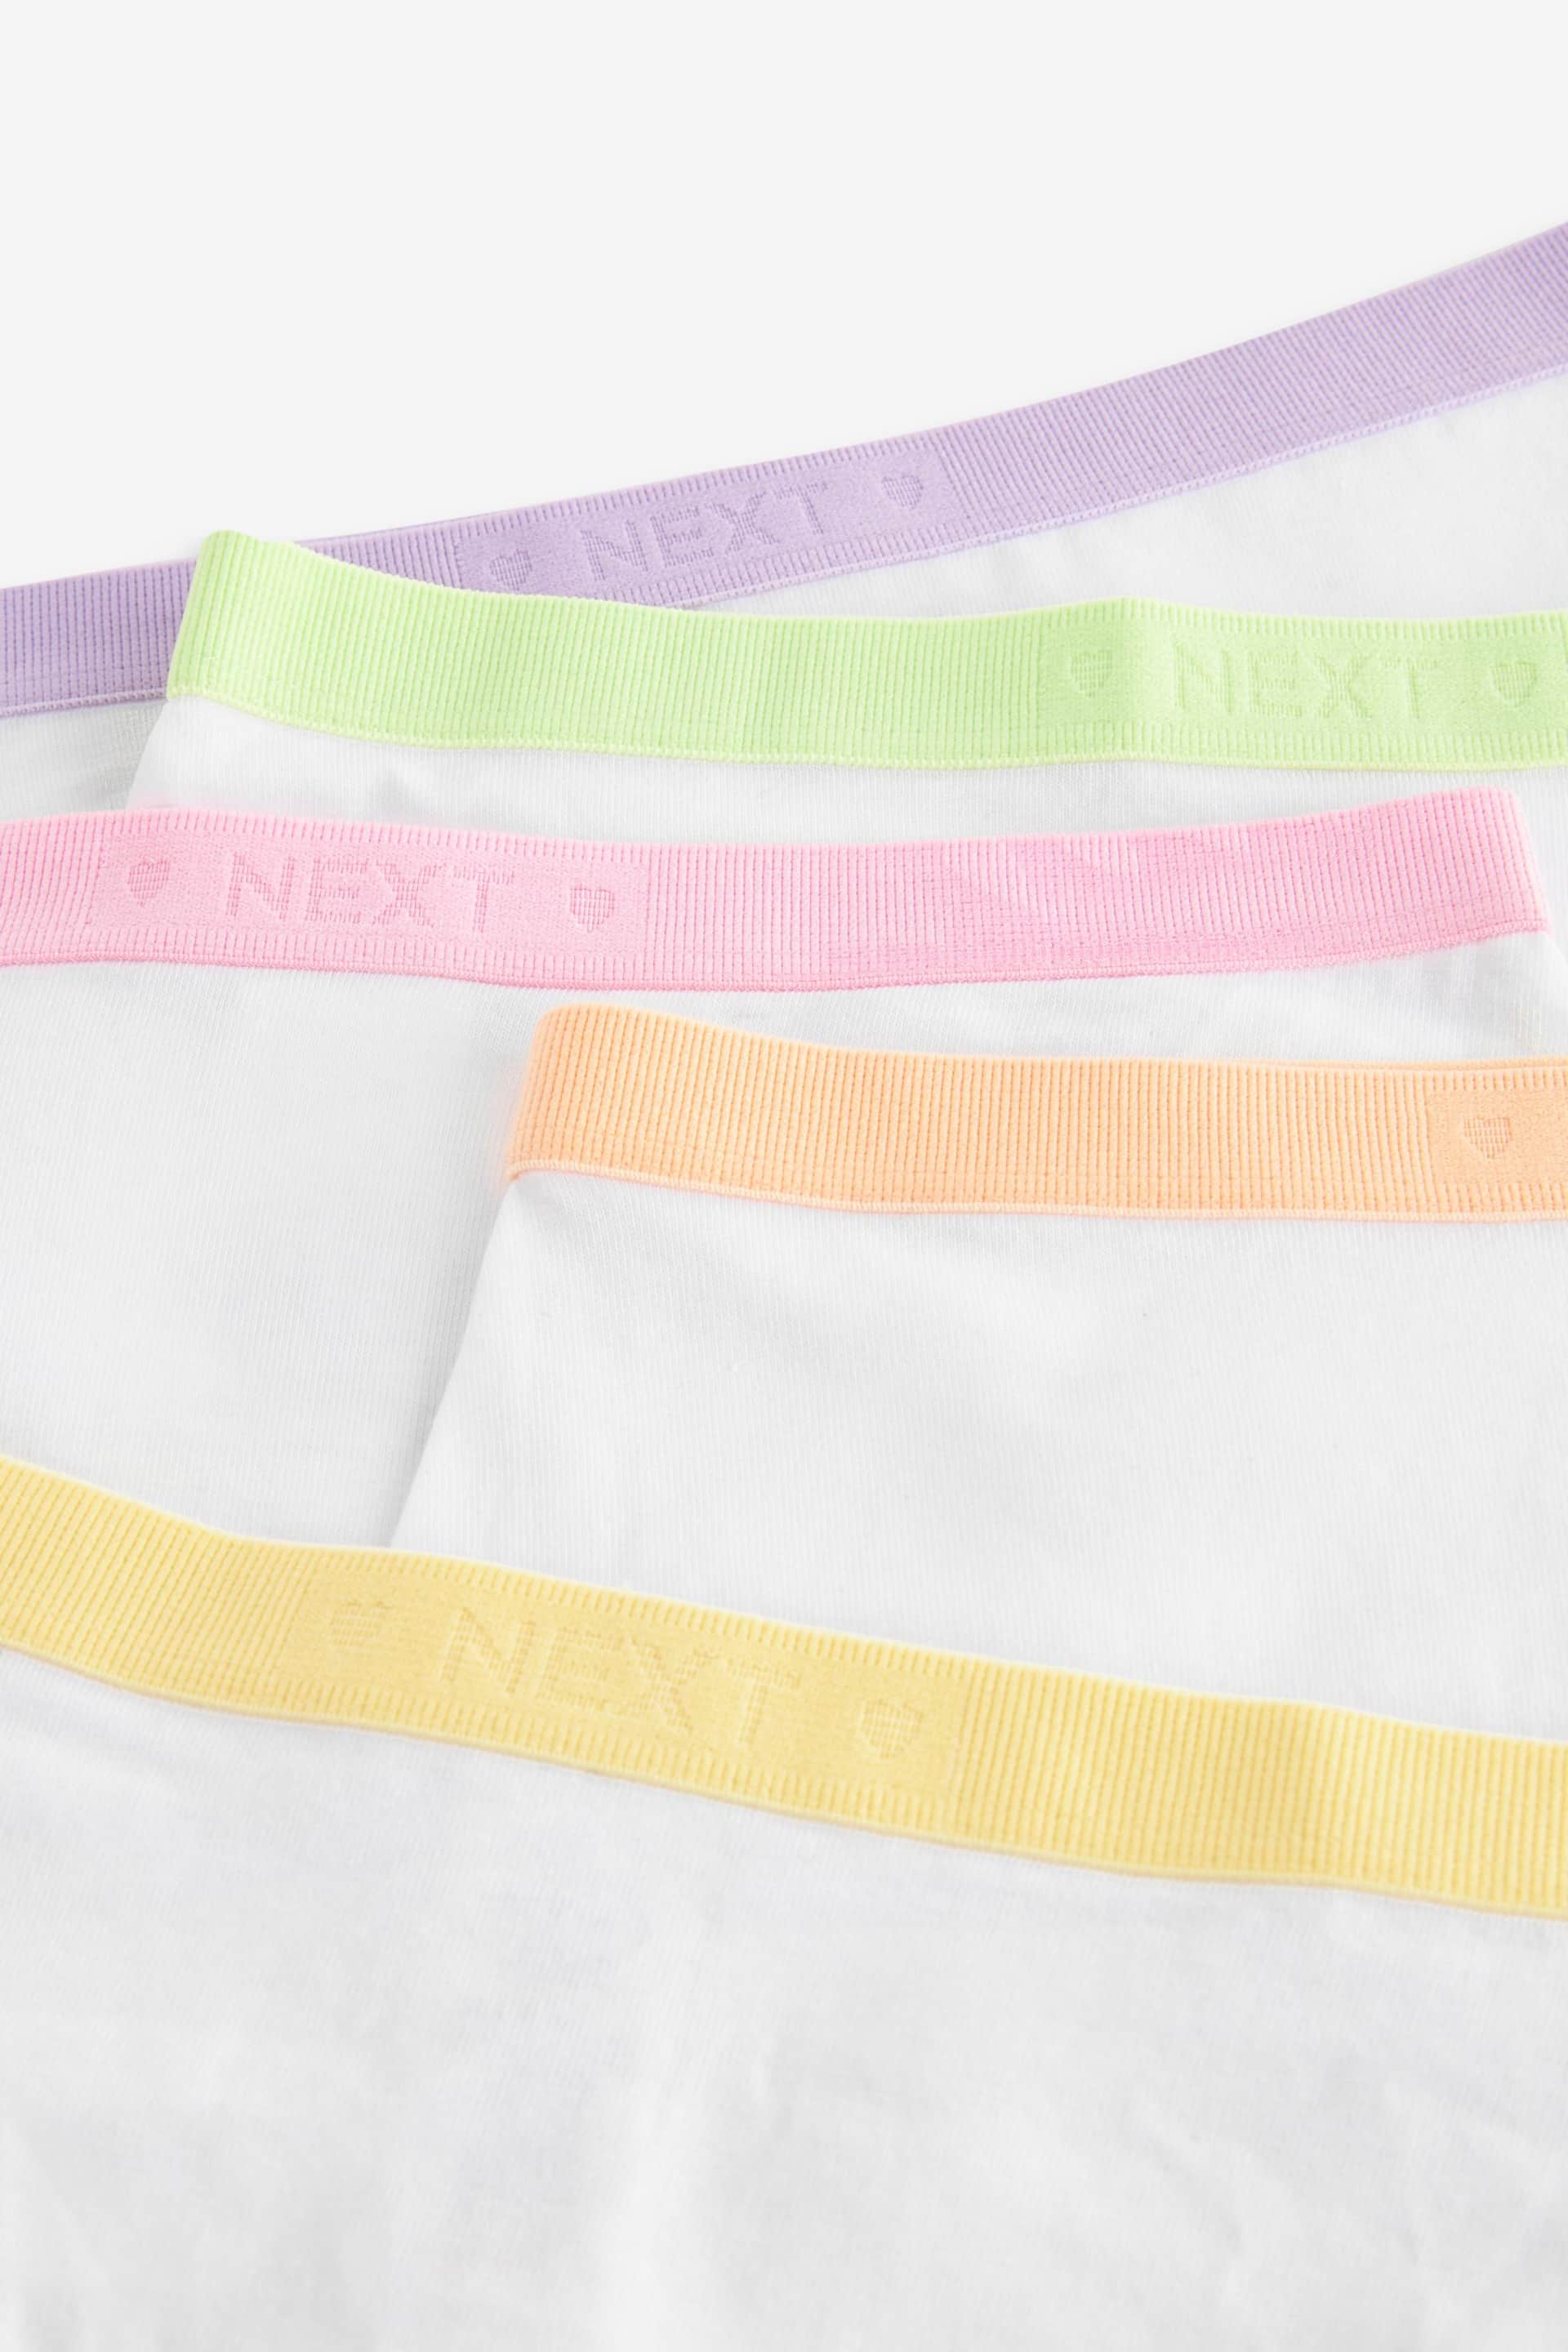 Multi Pastel Pastel Hipsters 5 Pack (2-16yrs) - Image 8 of 9